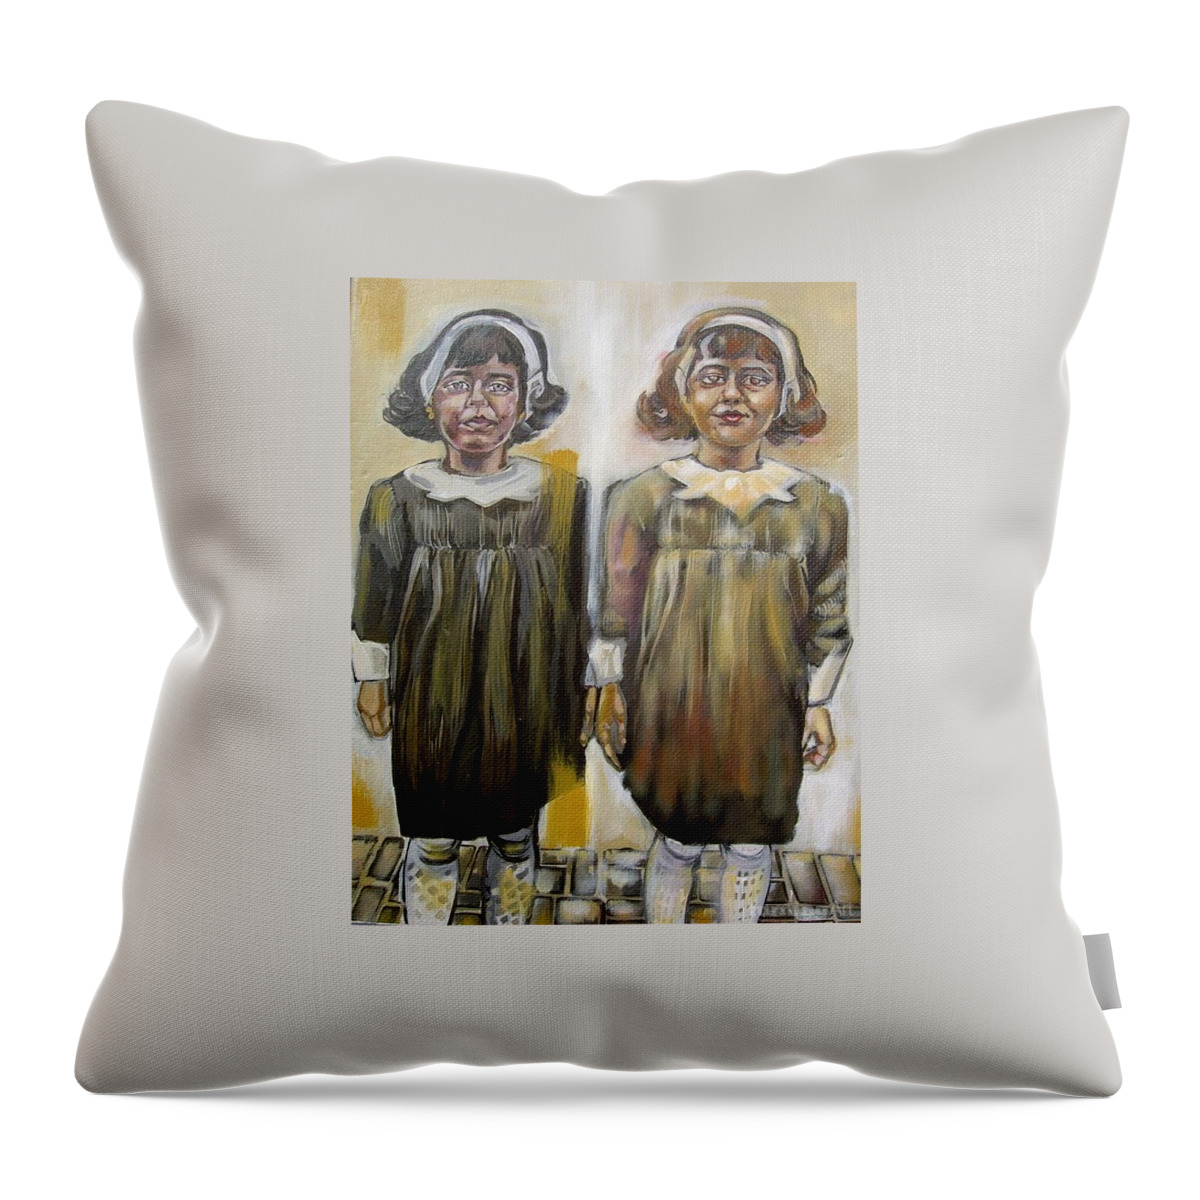  Throw Pillow featuring the painting Twins by Try Cheatham